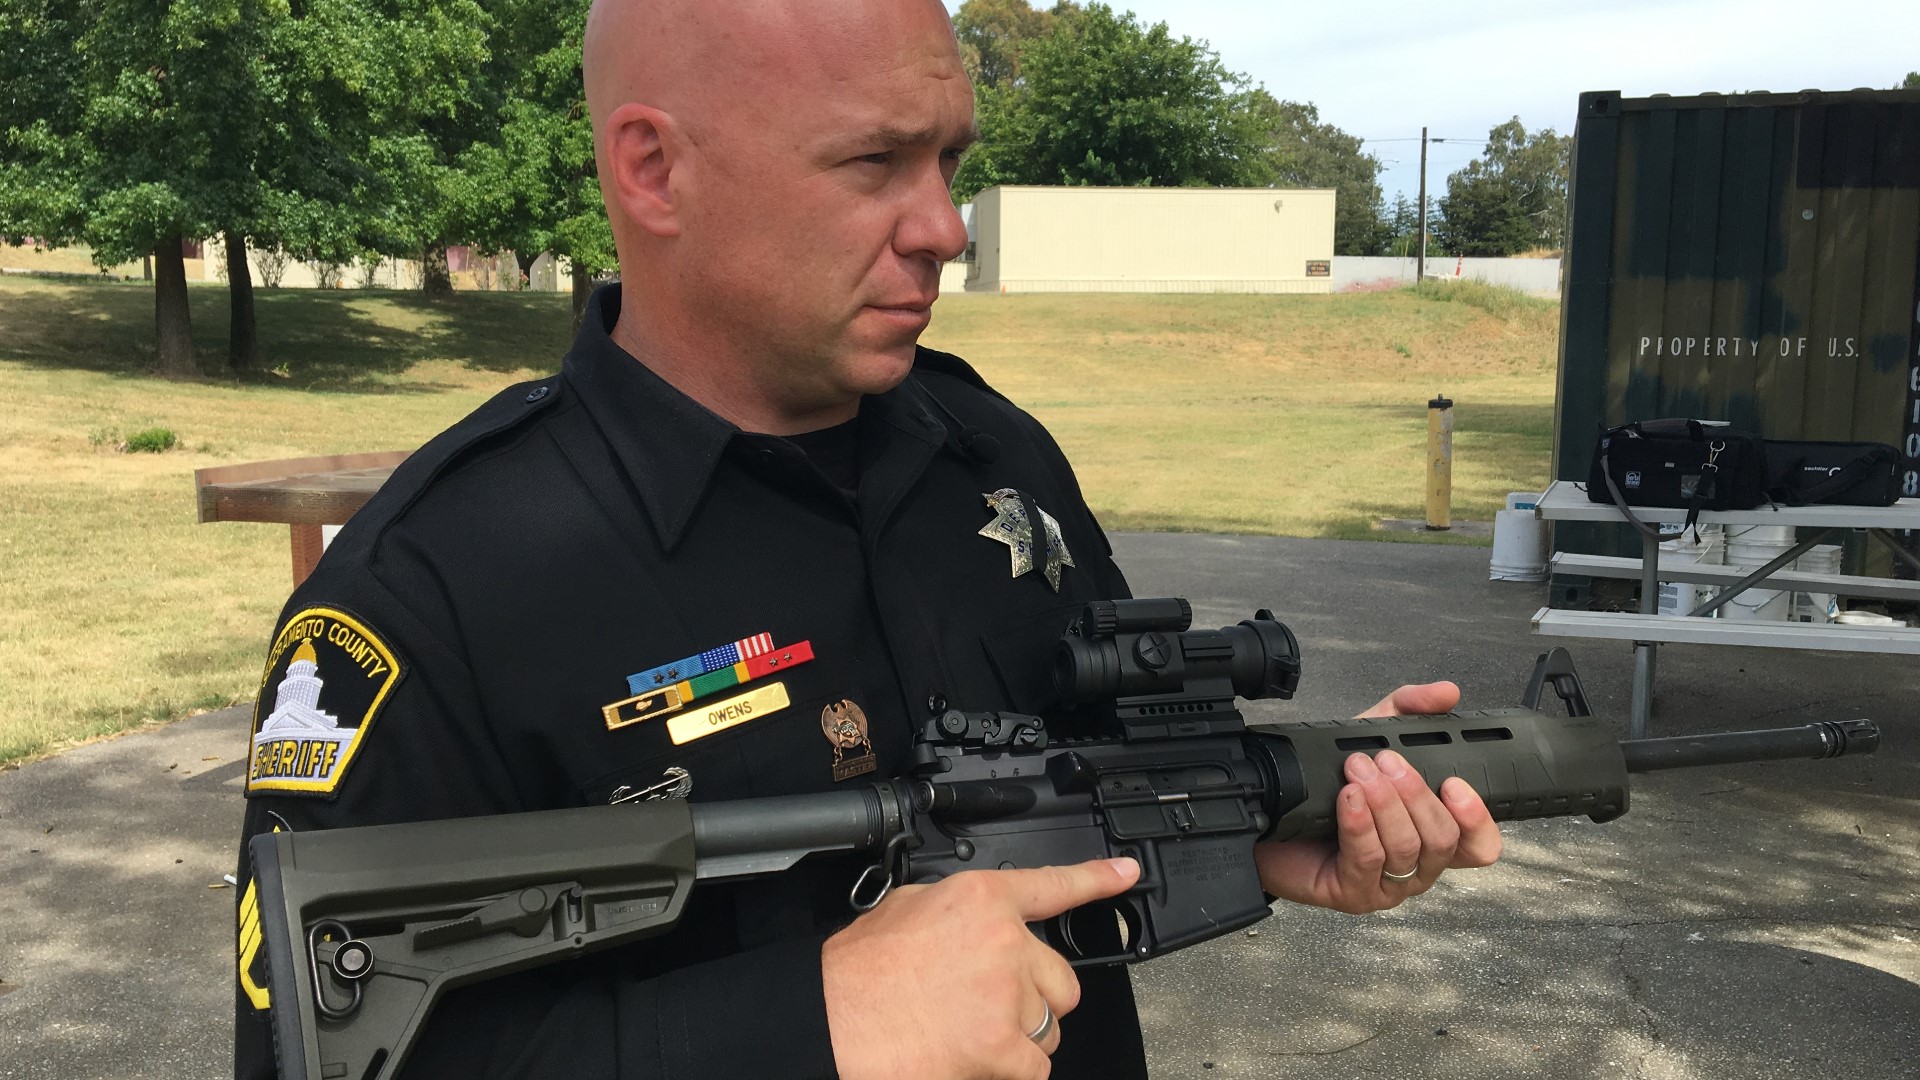 Sacramento County Sheriff's Office Rangemaster Sgt. Matthew Owens explained the type of weapon used in the deadly shooting and the criteria of an "assault rifle."